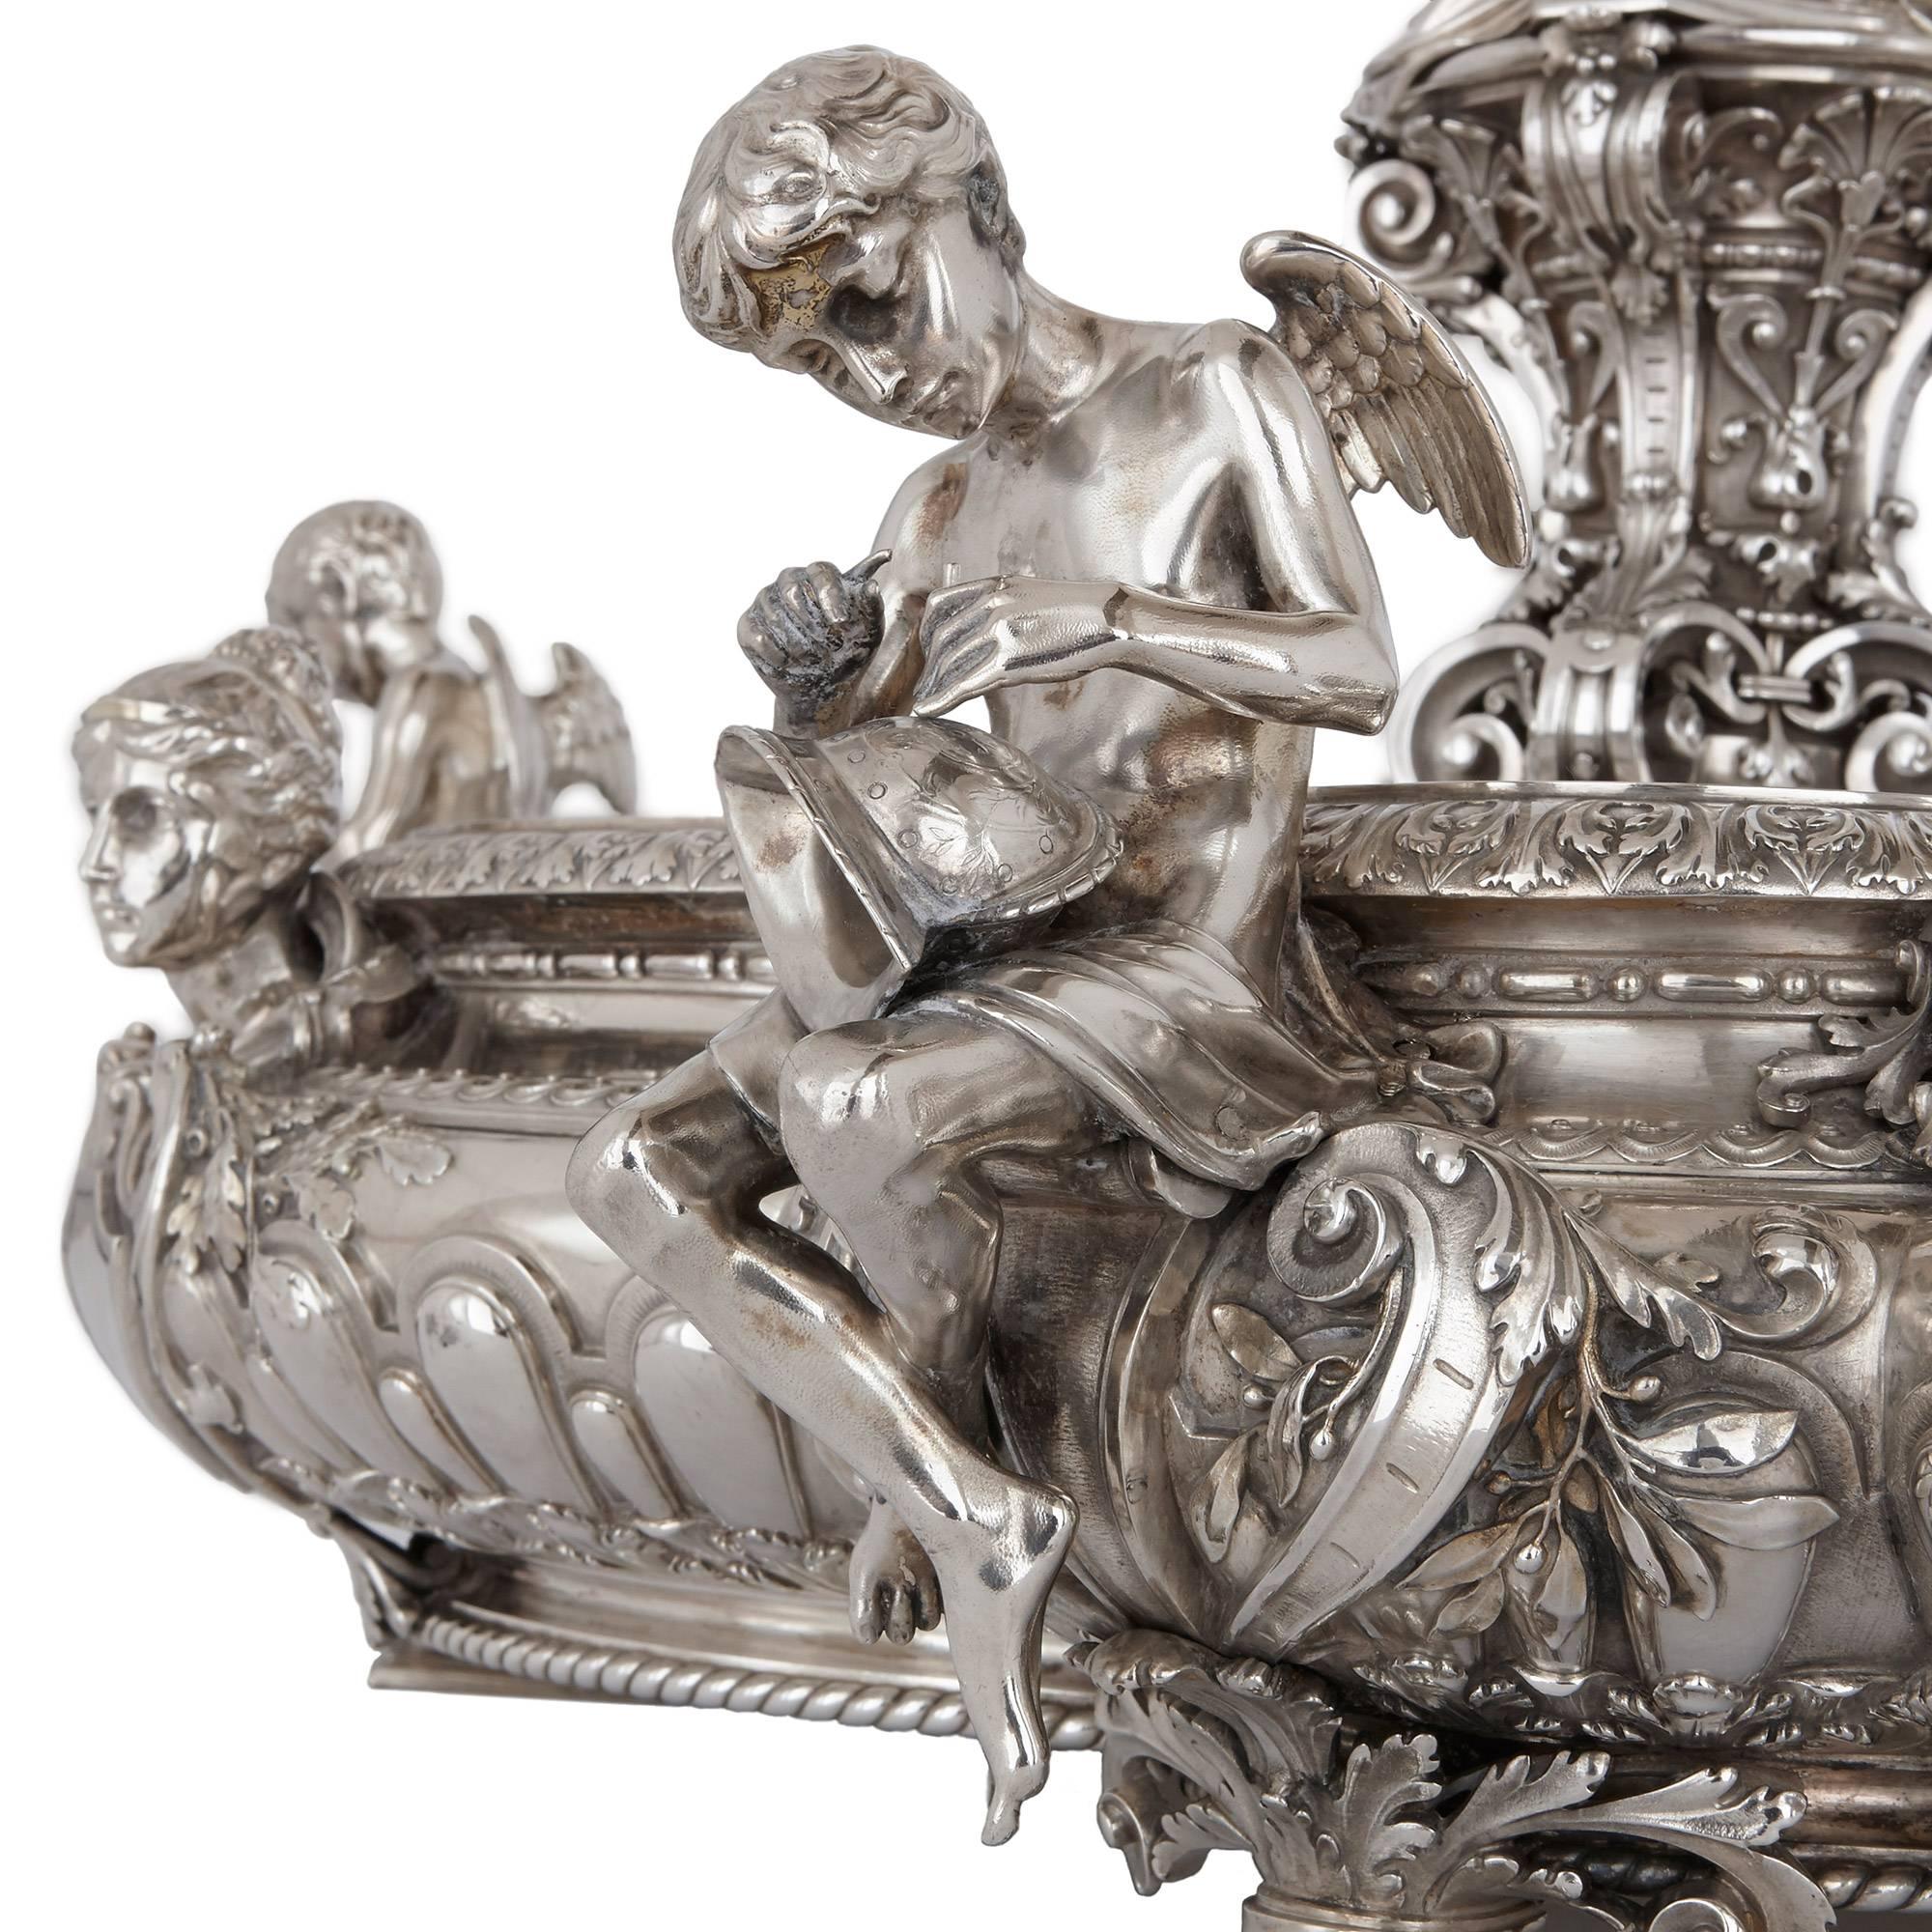 19th Century Solid Silver Centrepiece by Armand-Calliat et Fils